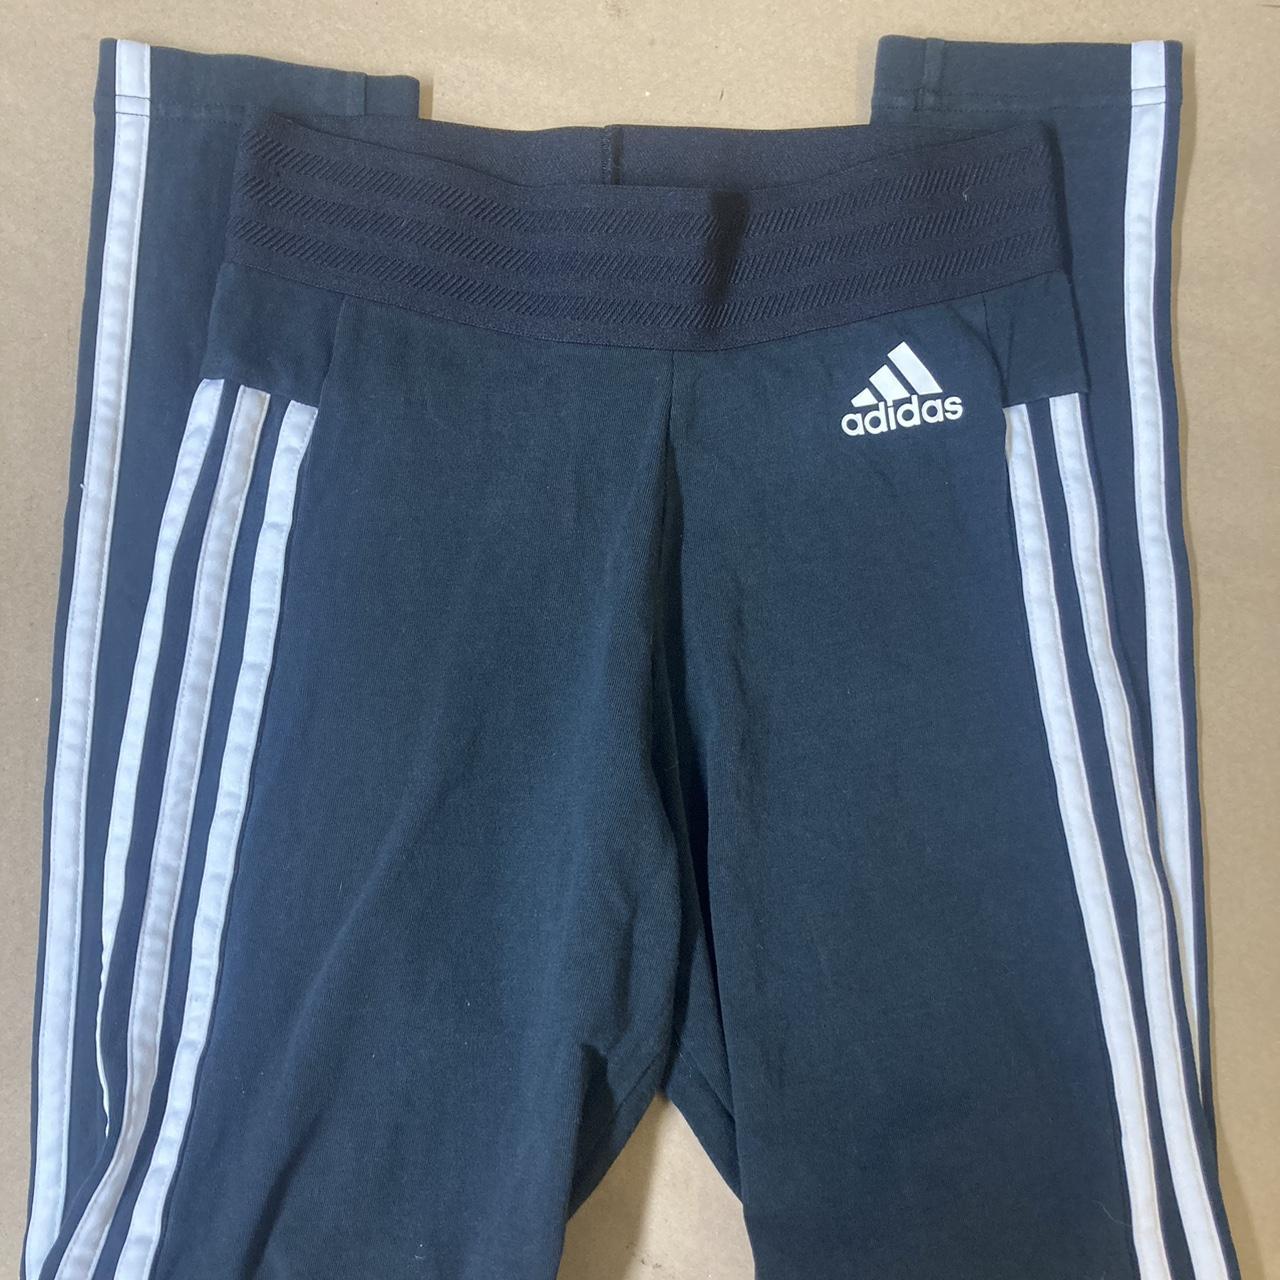 Adidas leggings Only worn a couple of times... - Depop